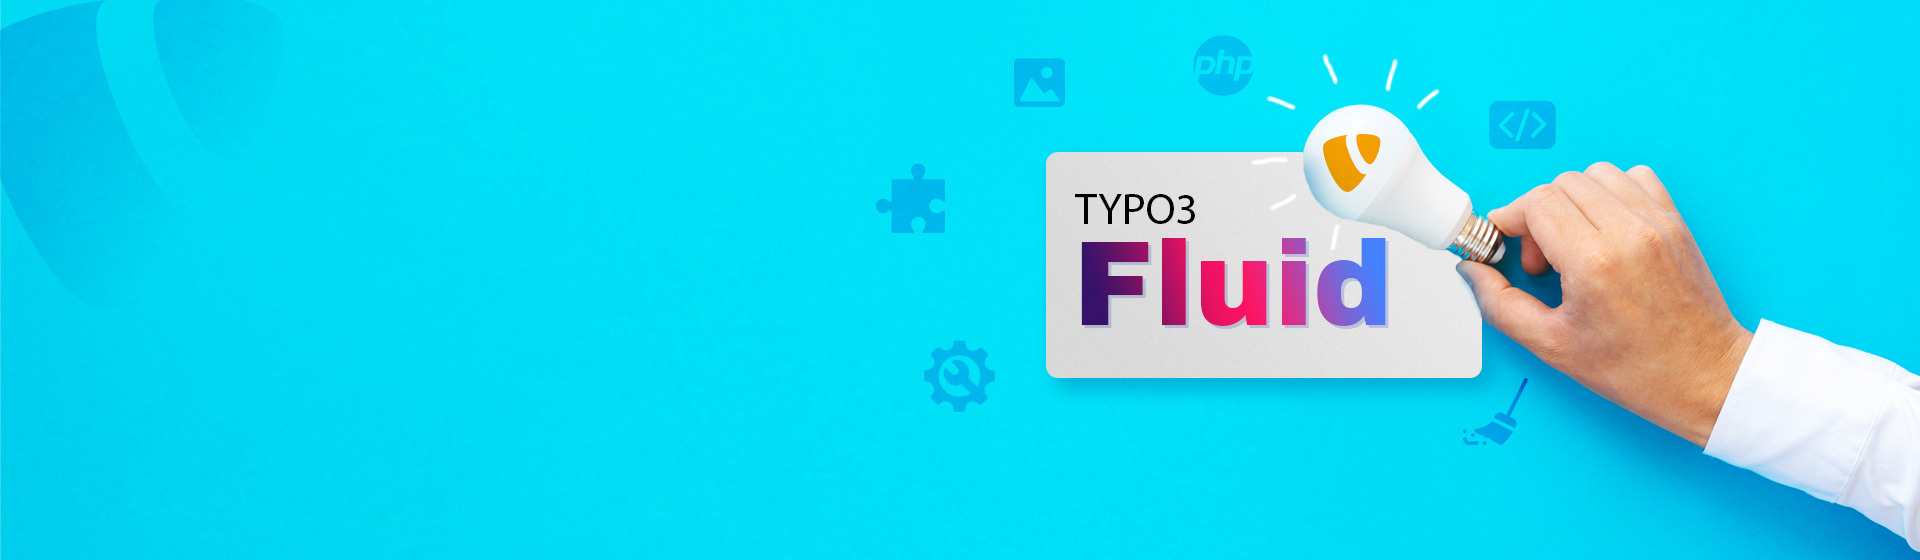 Diving Into TYPO3 Fluid [50+ Tips]